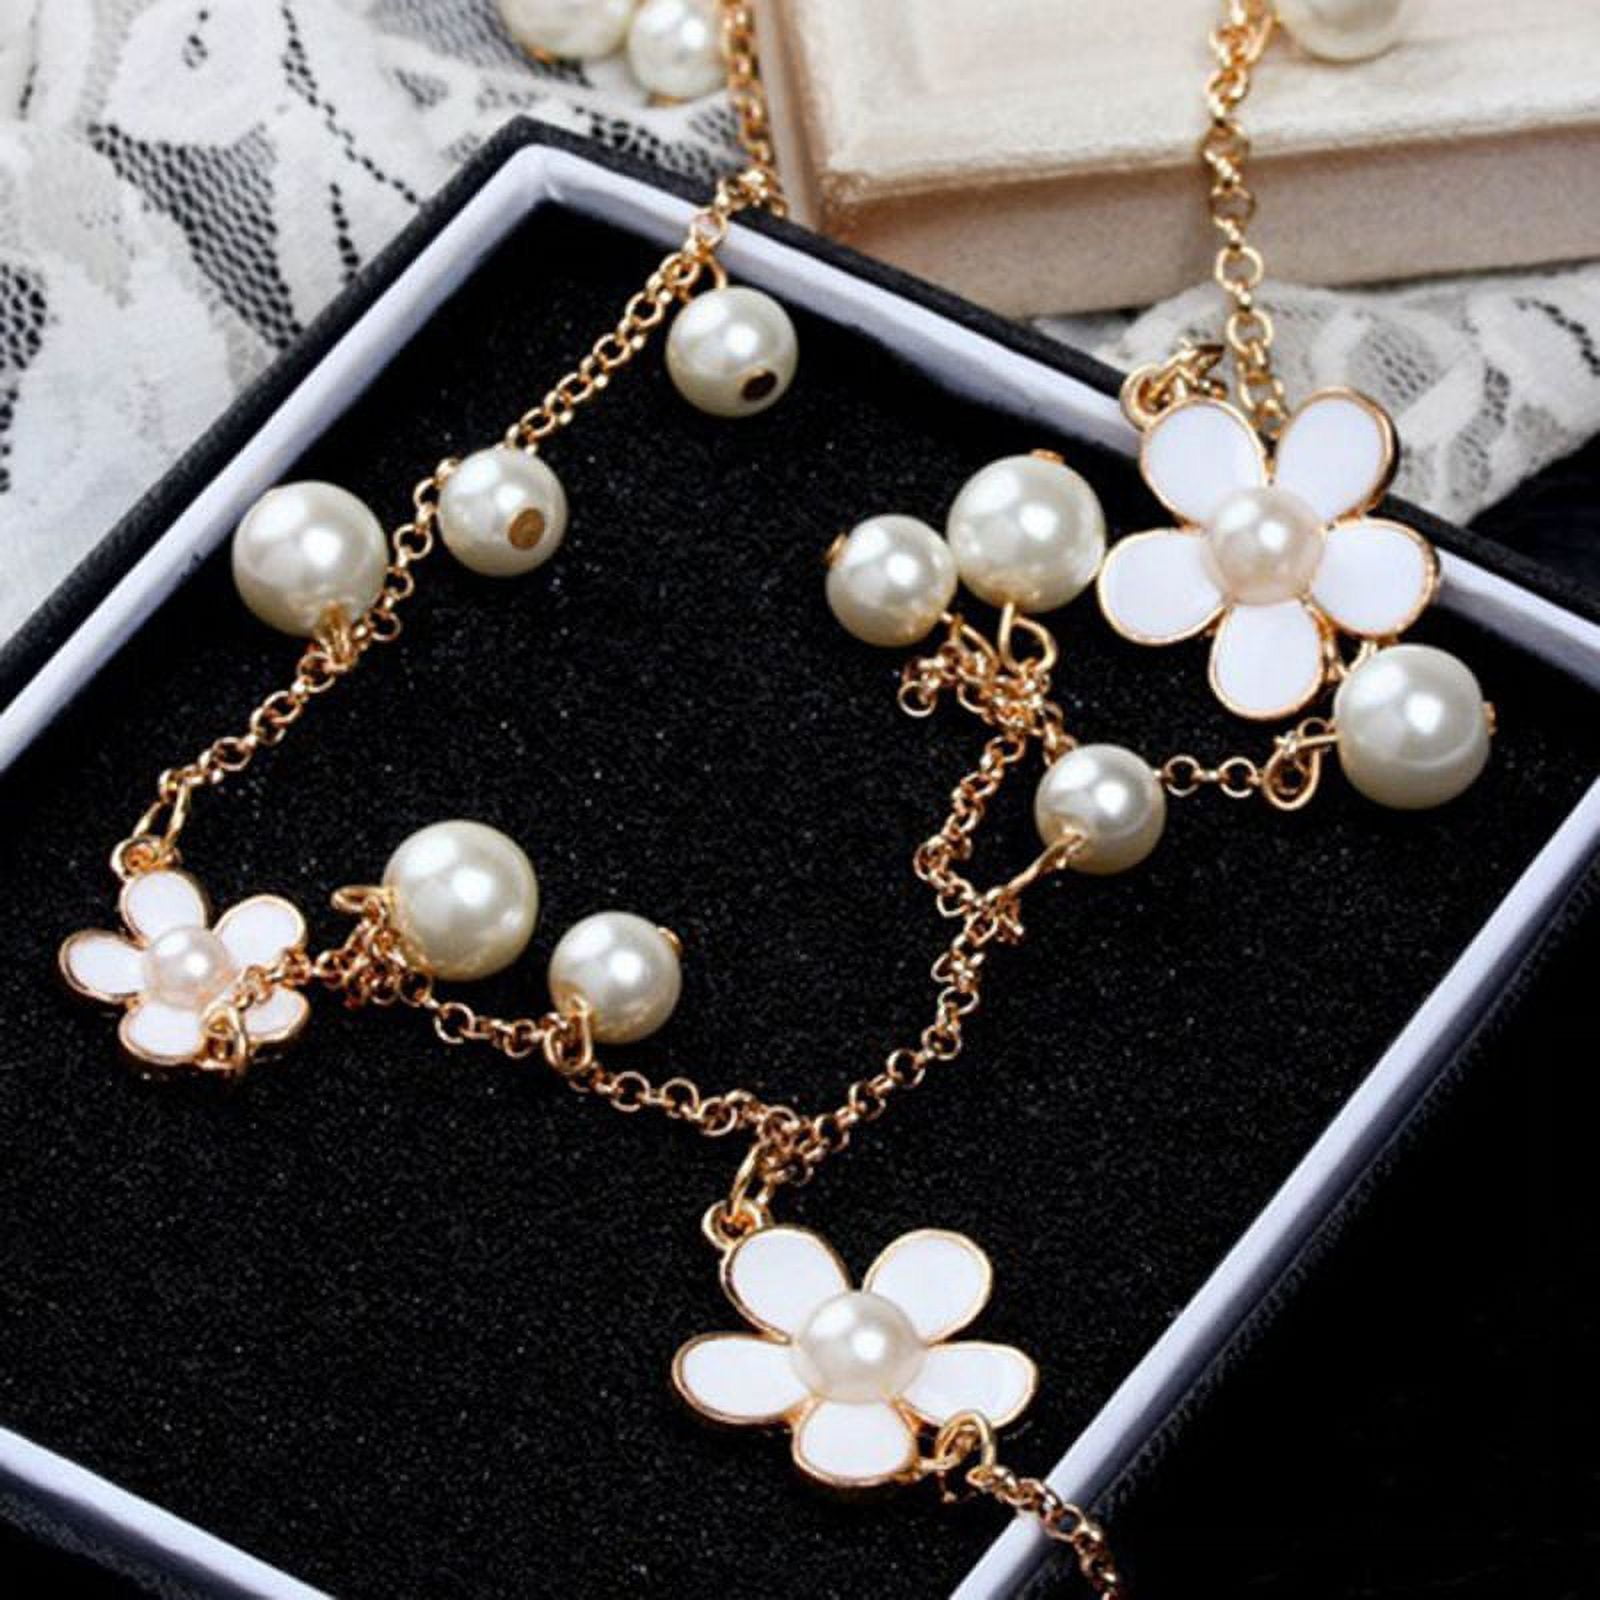 Fashion Jewelry Designer Imitation Pearl Necklace Camellia Flower Long  Stranded Necklace for Women